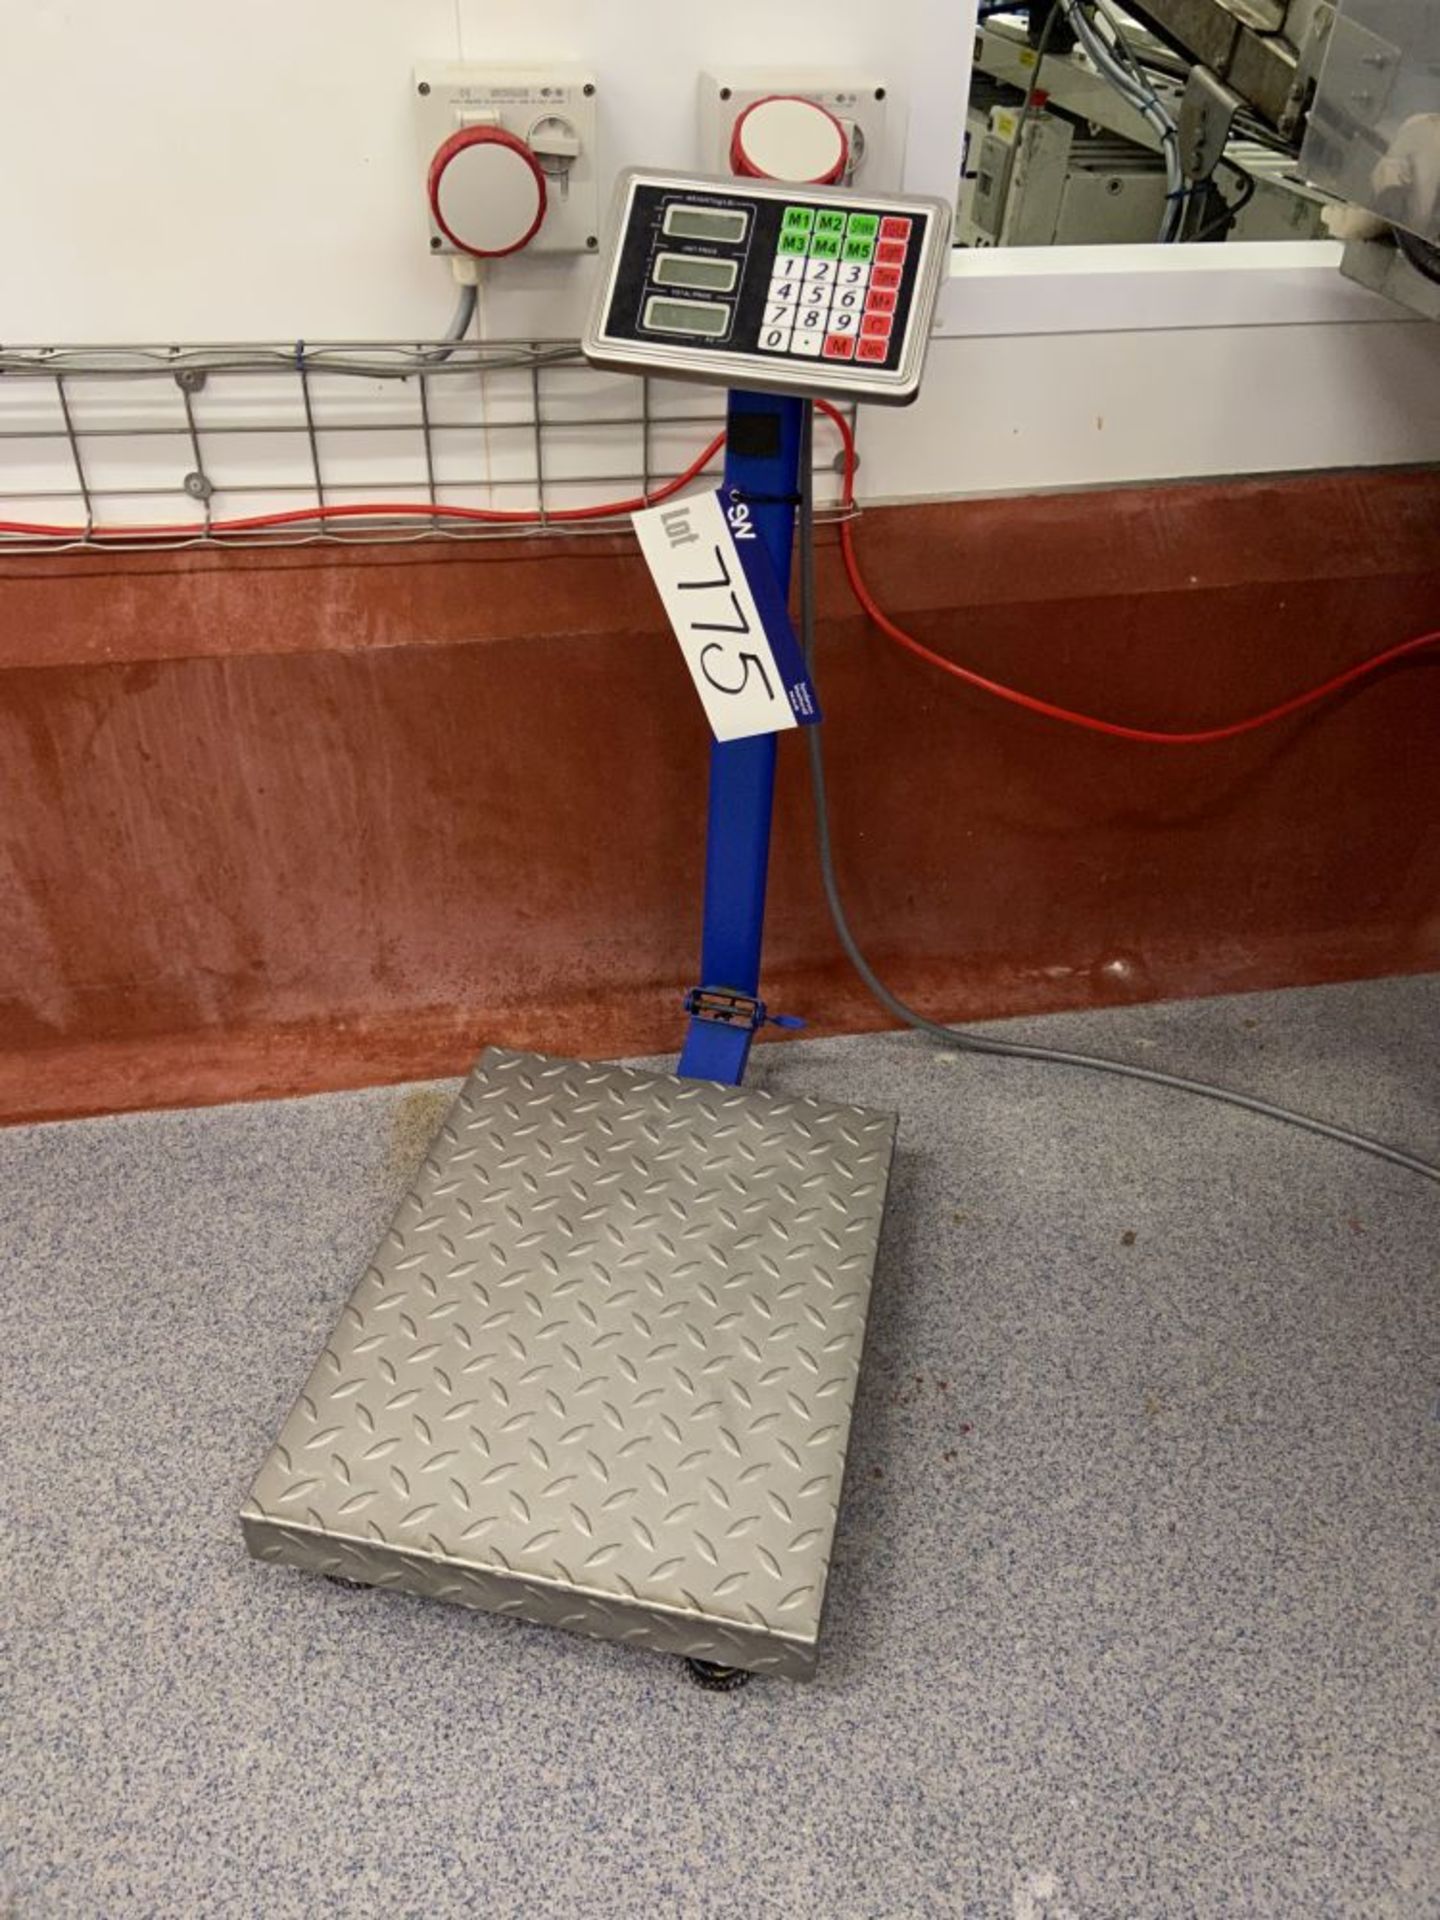 Platform Weighing Scale, approx. 400mm x 500mm platformPlease read the following important